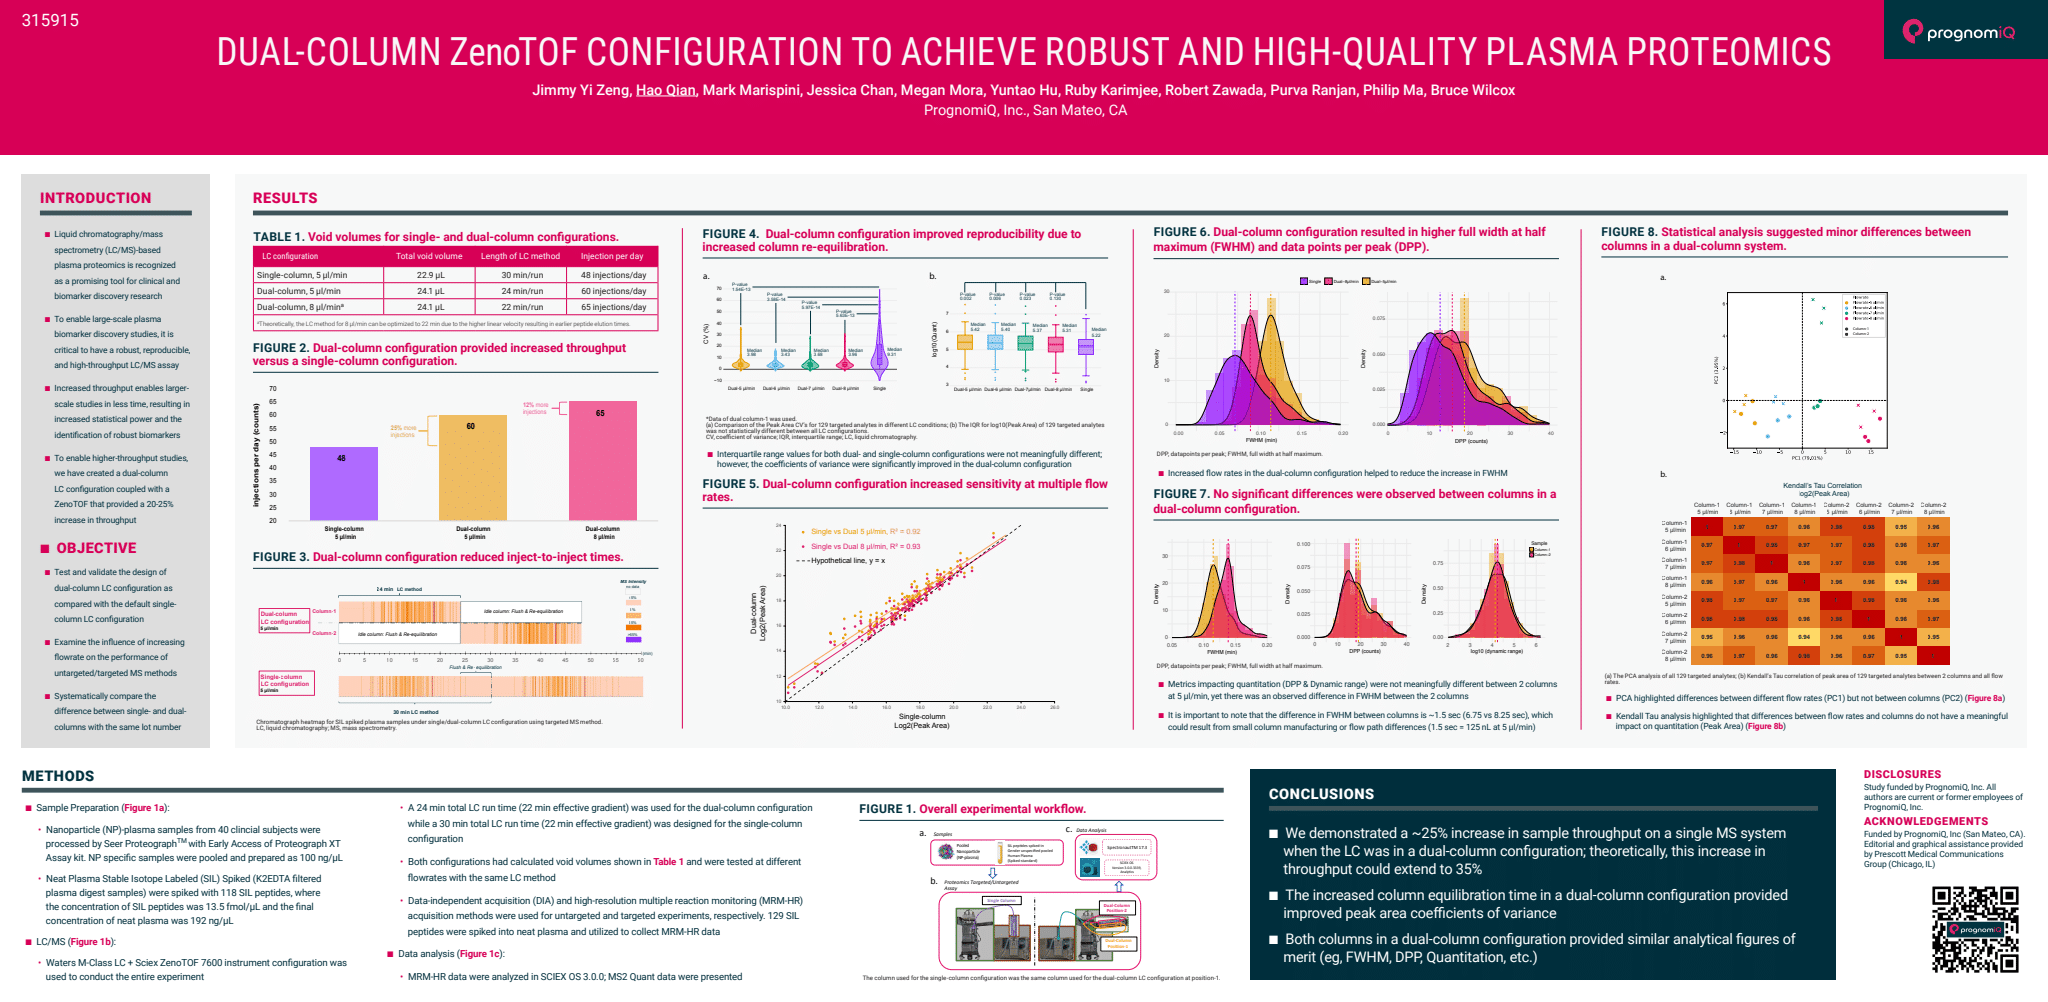 scientific poster showing a dual-column zenotof configuration to achieve robust and high-quality plasma proteomics